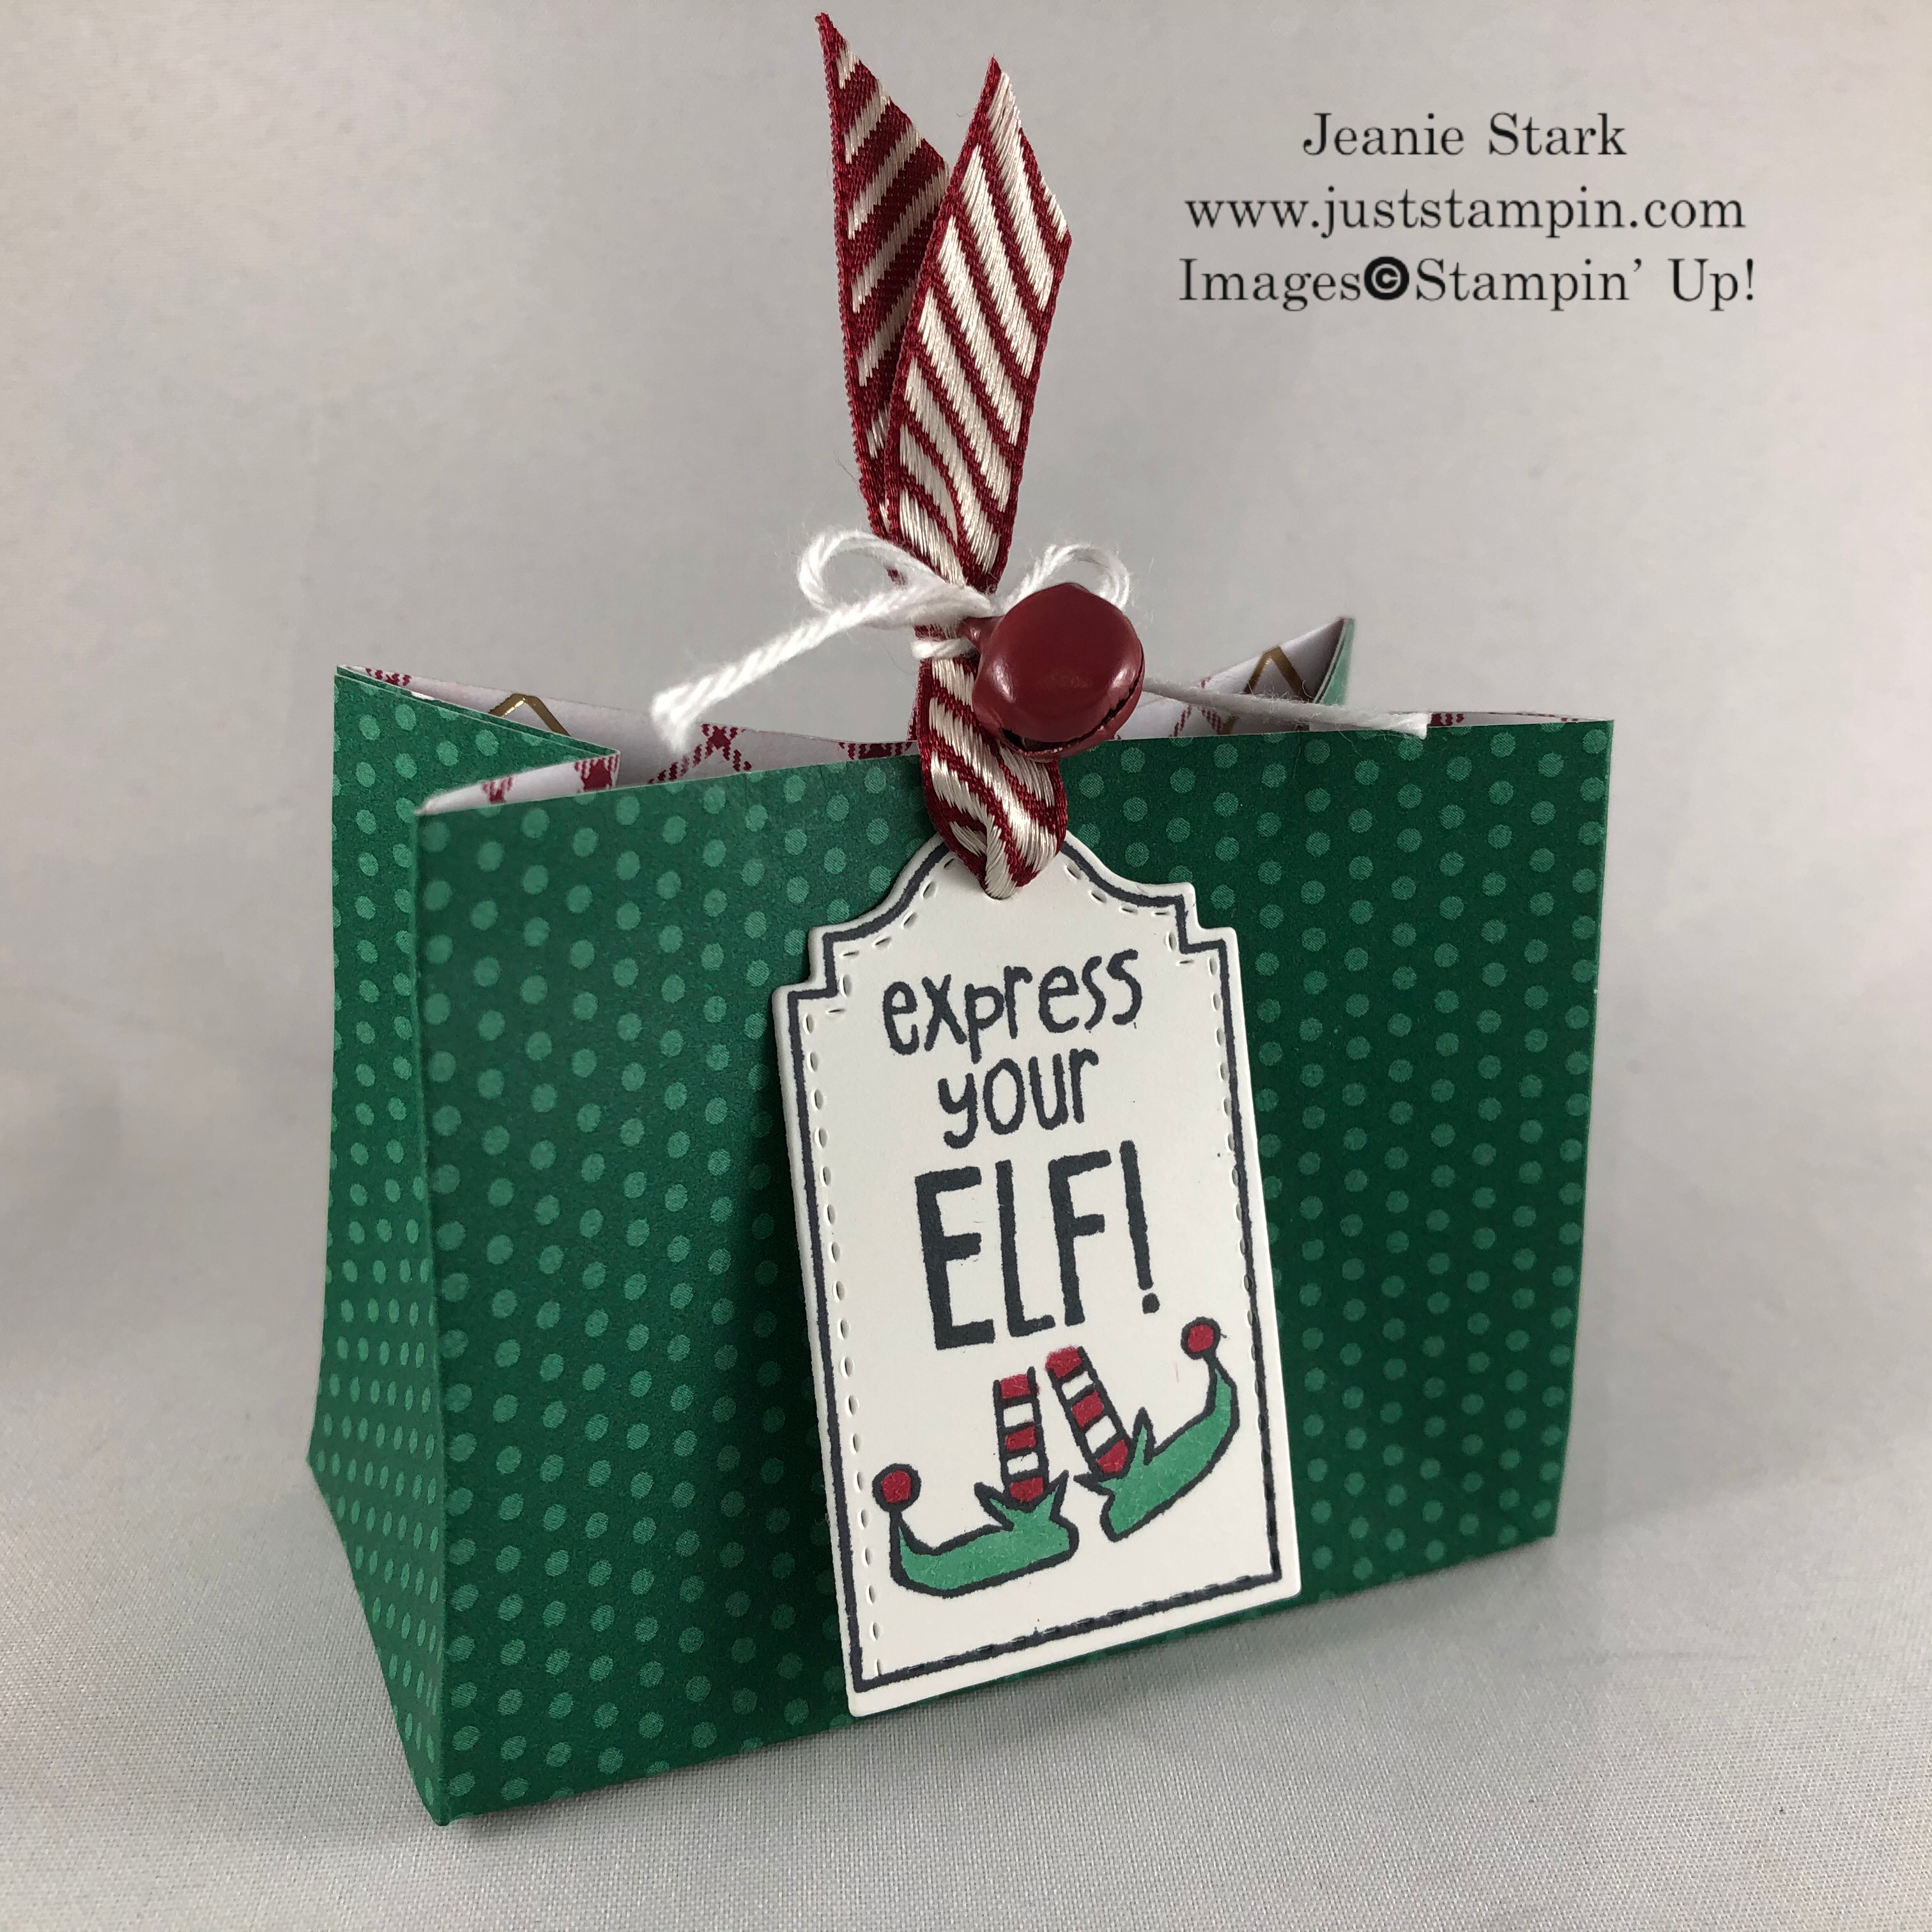 Christmas bag idea using the Tags Tags Tags Bundle from Stampin' Up! - Jeanie Stark StampinUp